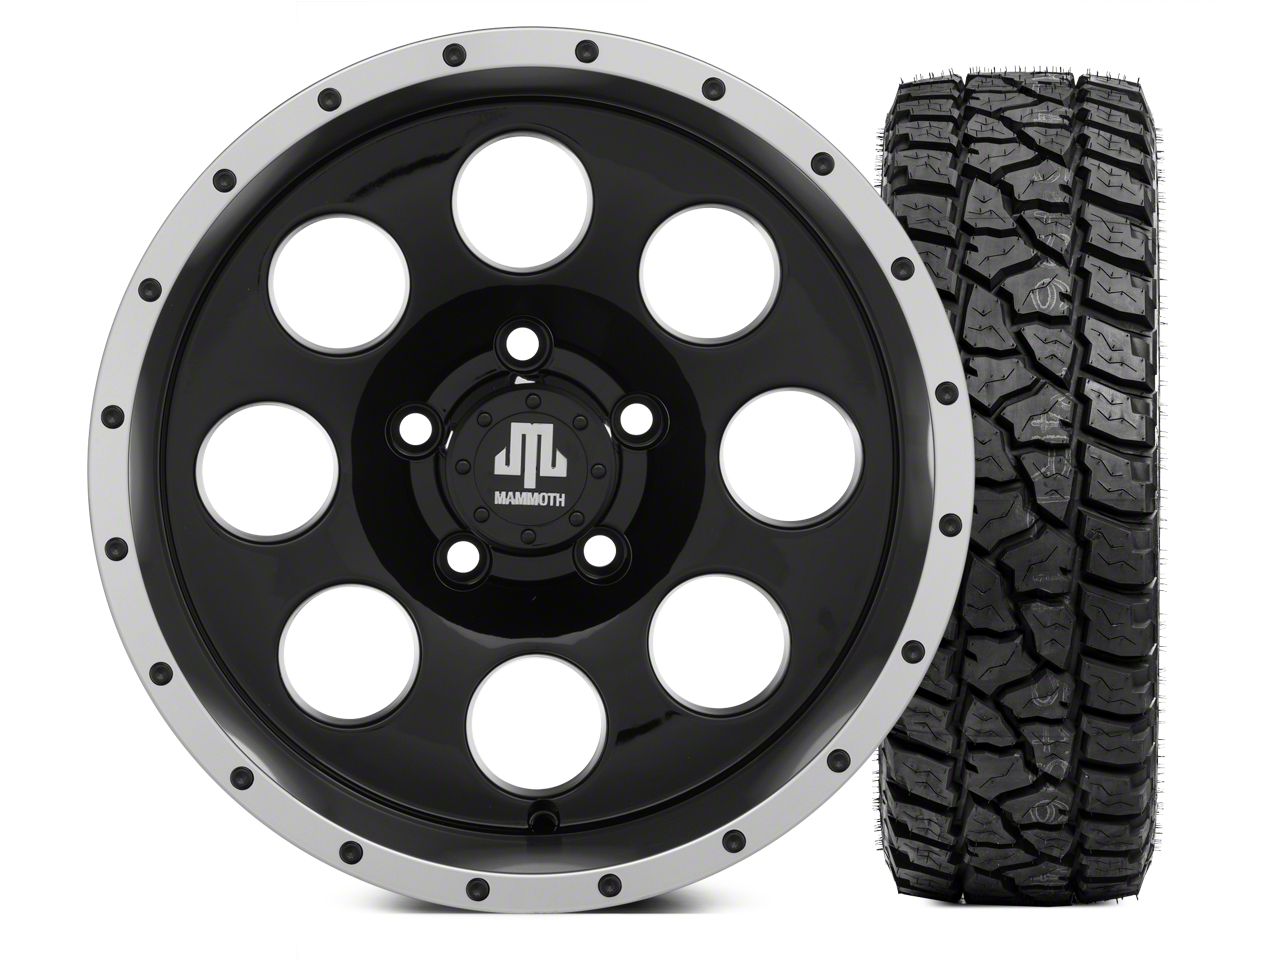 Tacoma Wheel & Tire Packages